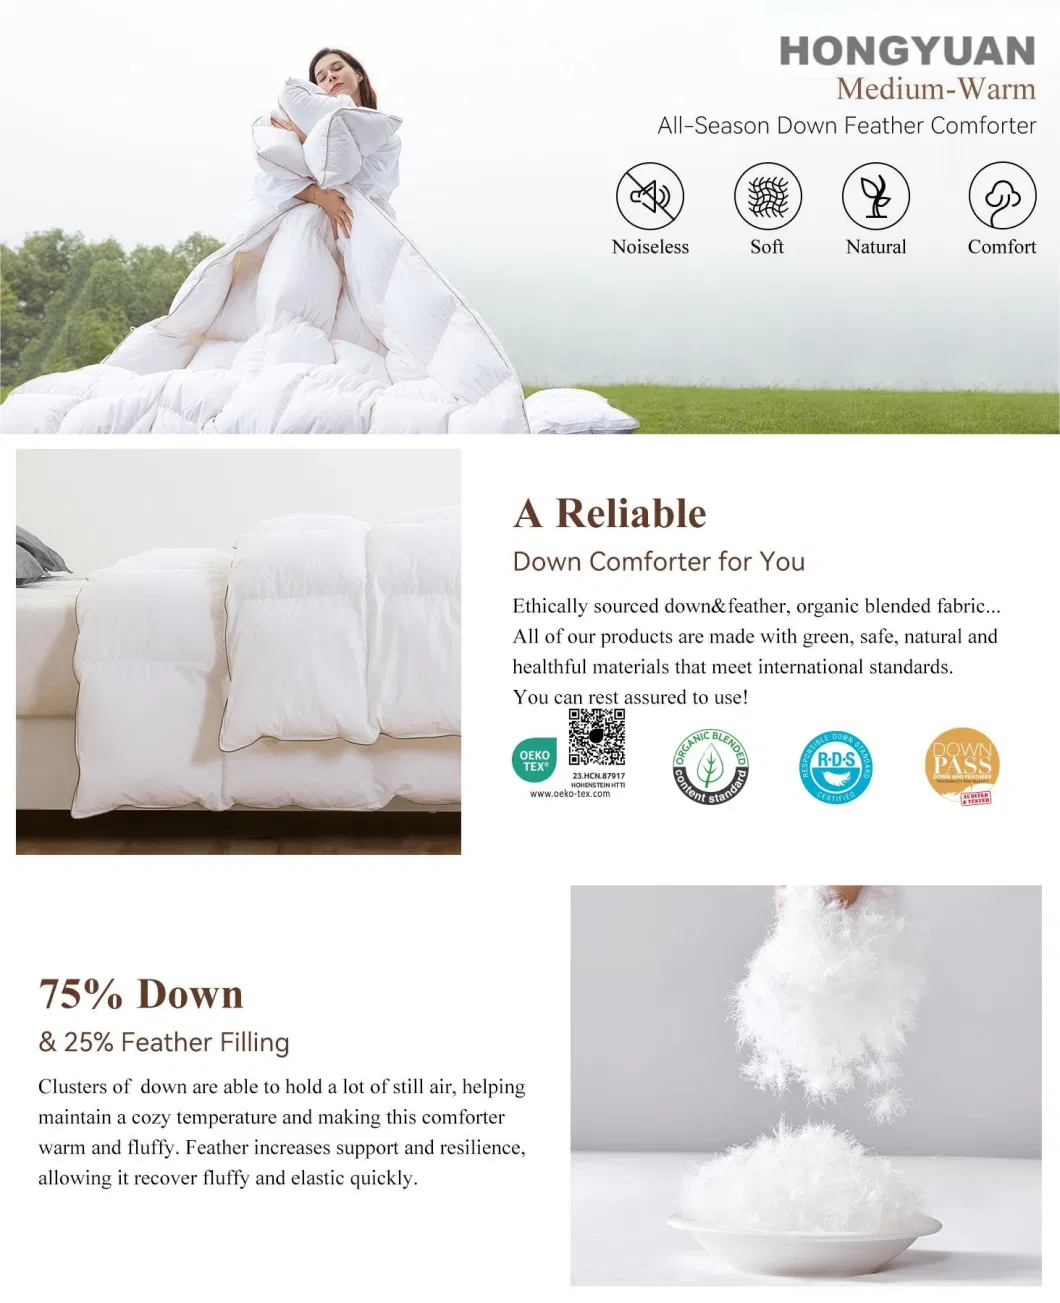 All-Season 75% Down Comforter Full Size, Fluffy Duvet Insert with 8 Corner Tabs, Durable Down Proof Cotton Blended Fabric and 3D Baffle Box Construction White